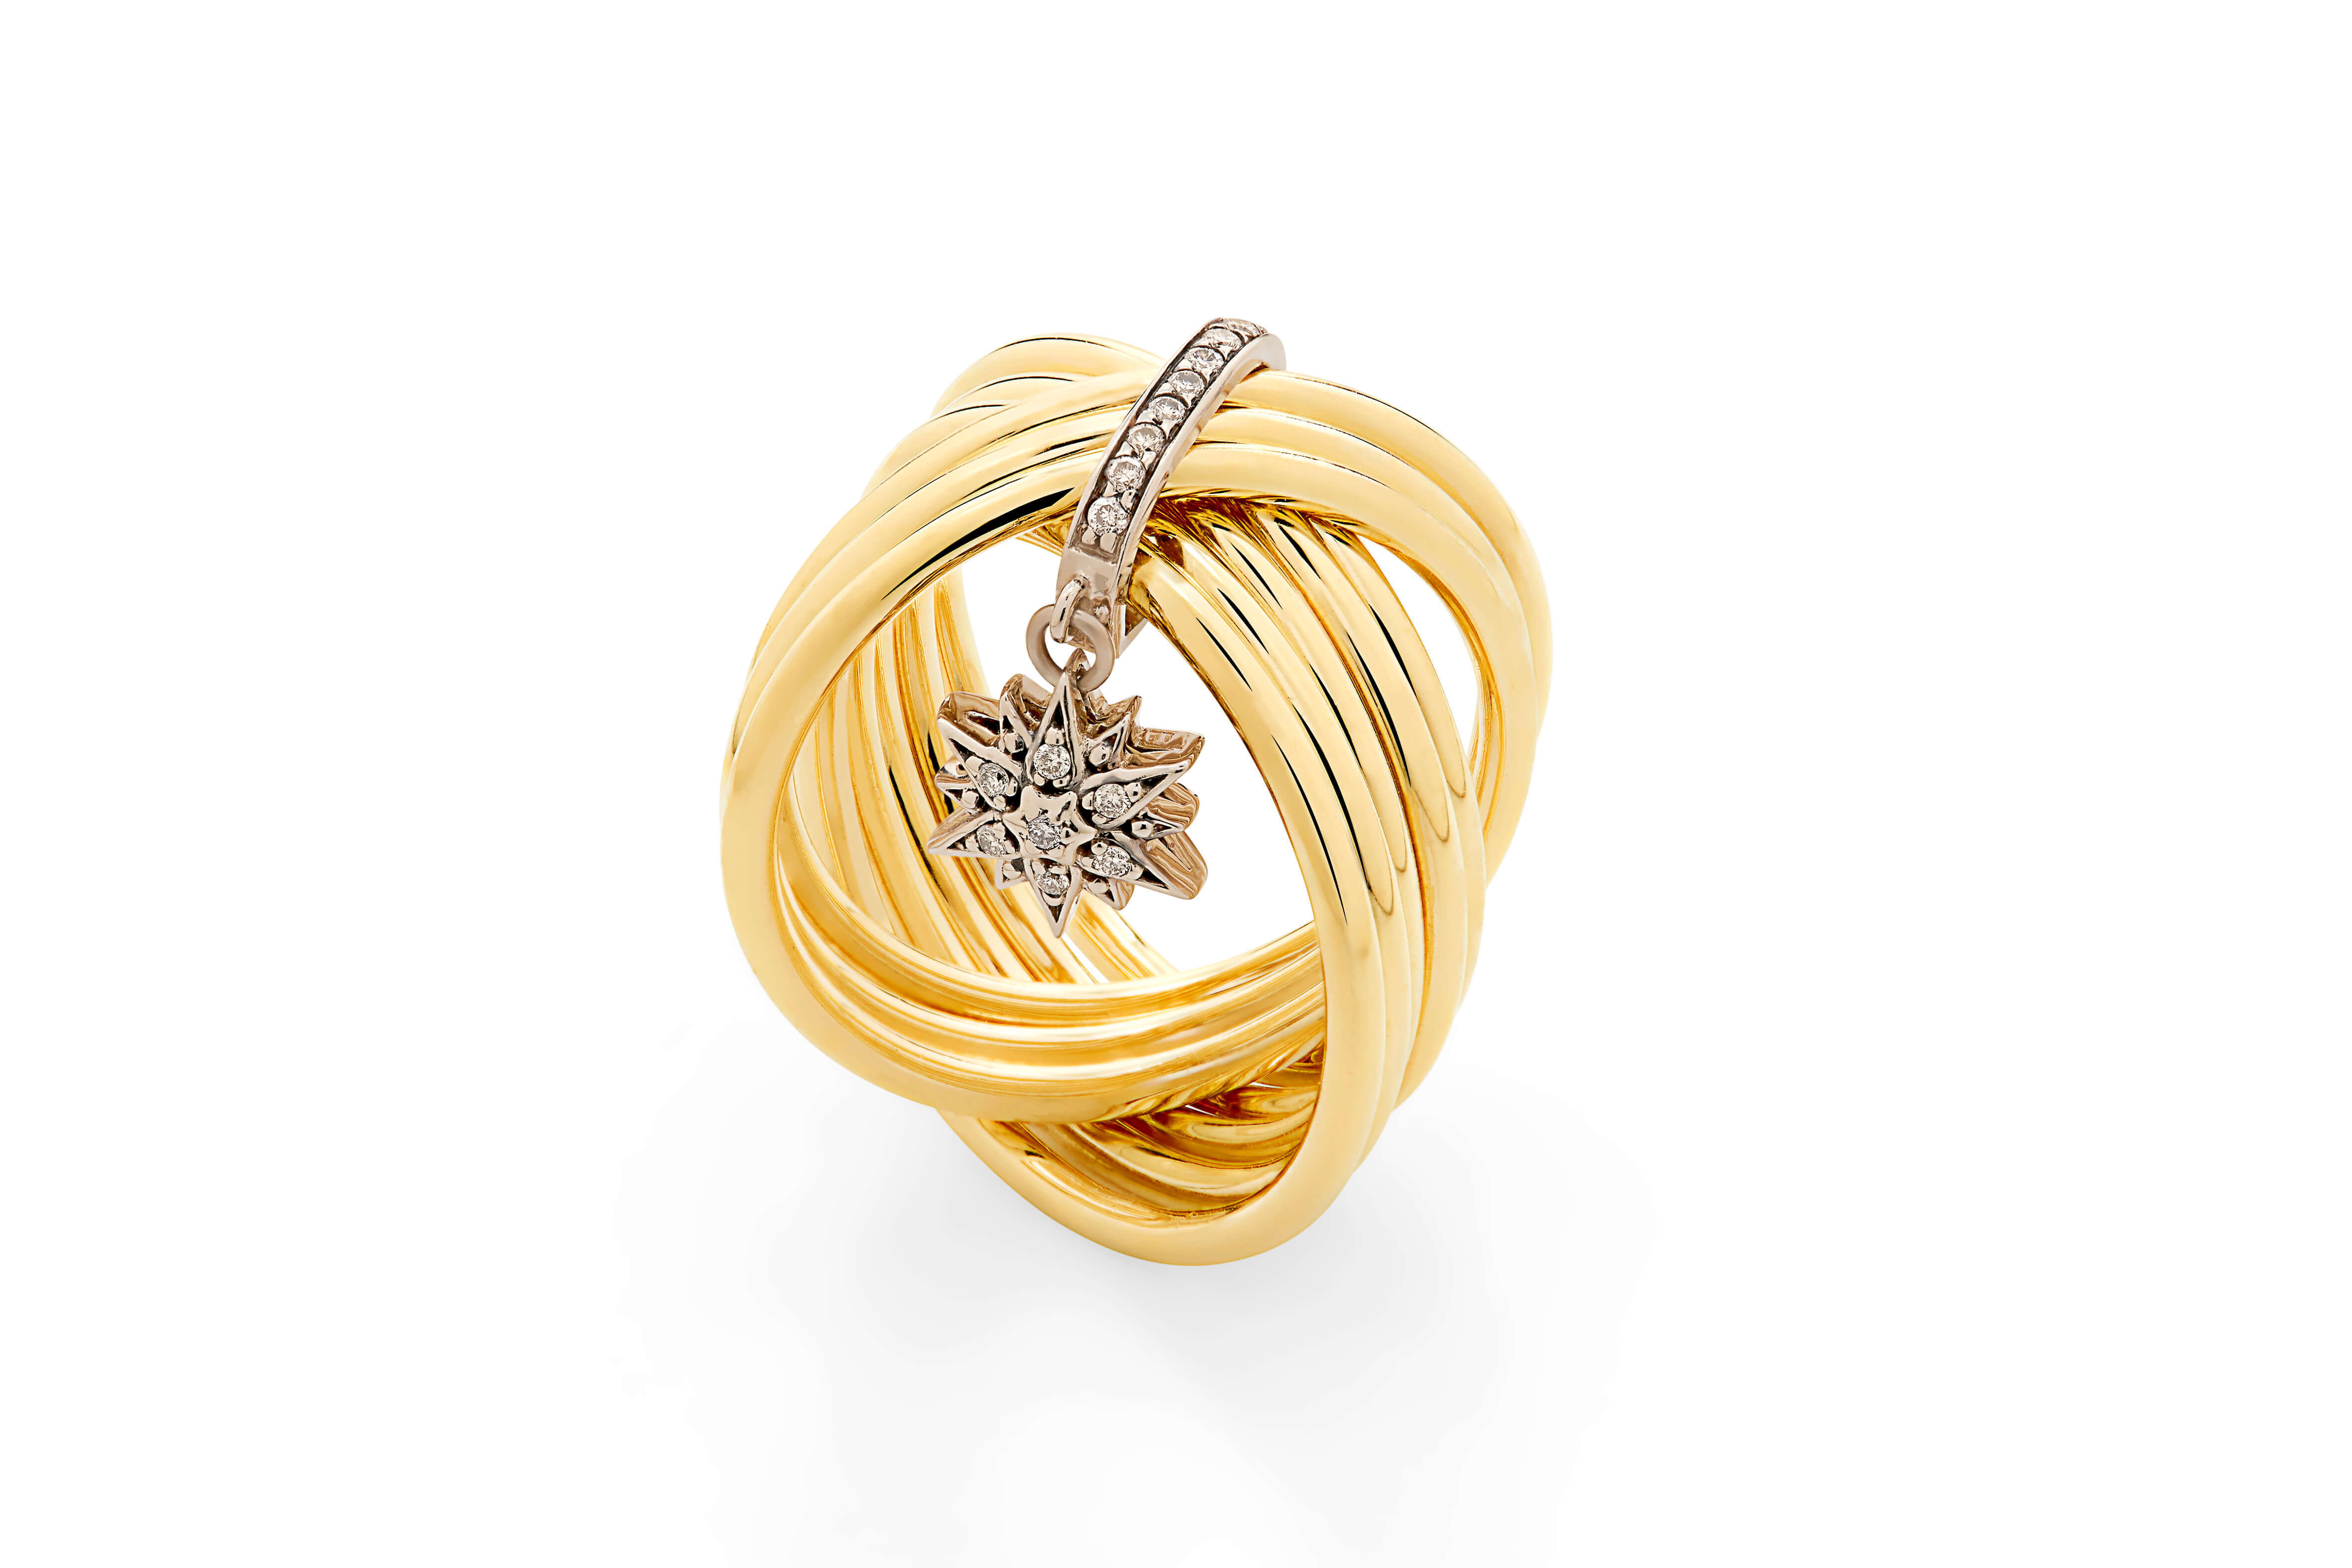 Pearls_of_Genesis_H.Stern_-_ring_in_18K_gold_and_diamonds_(A2B_205189)